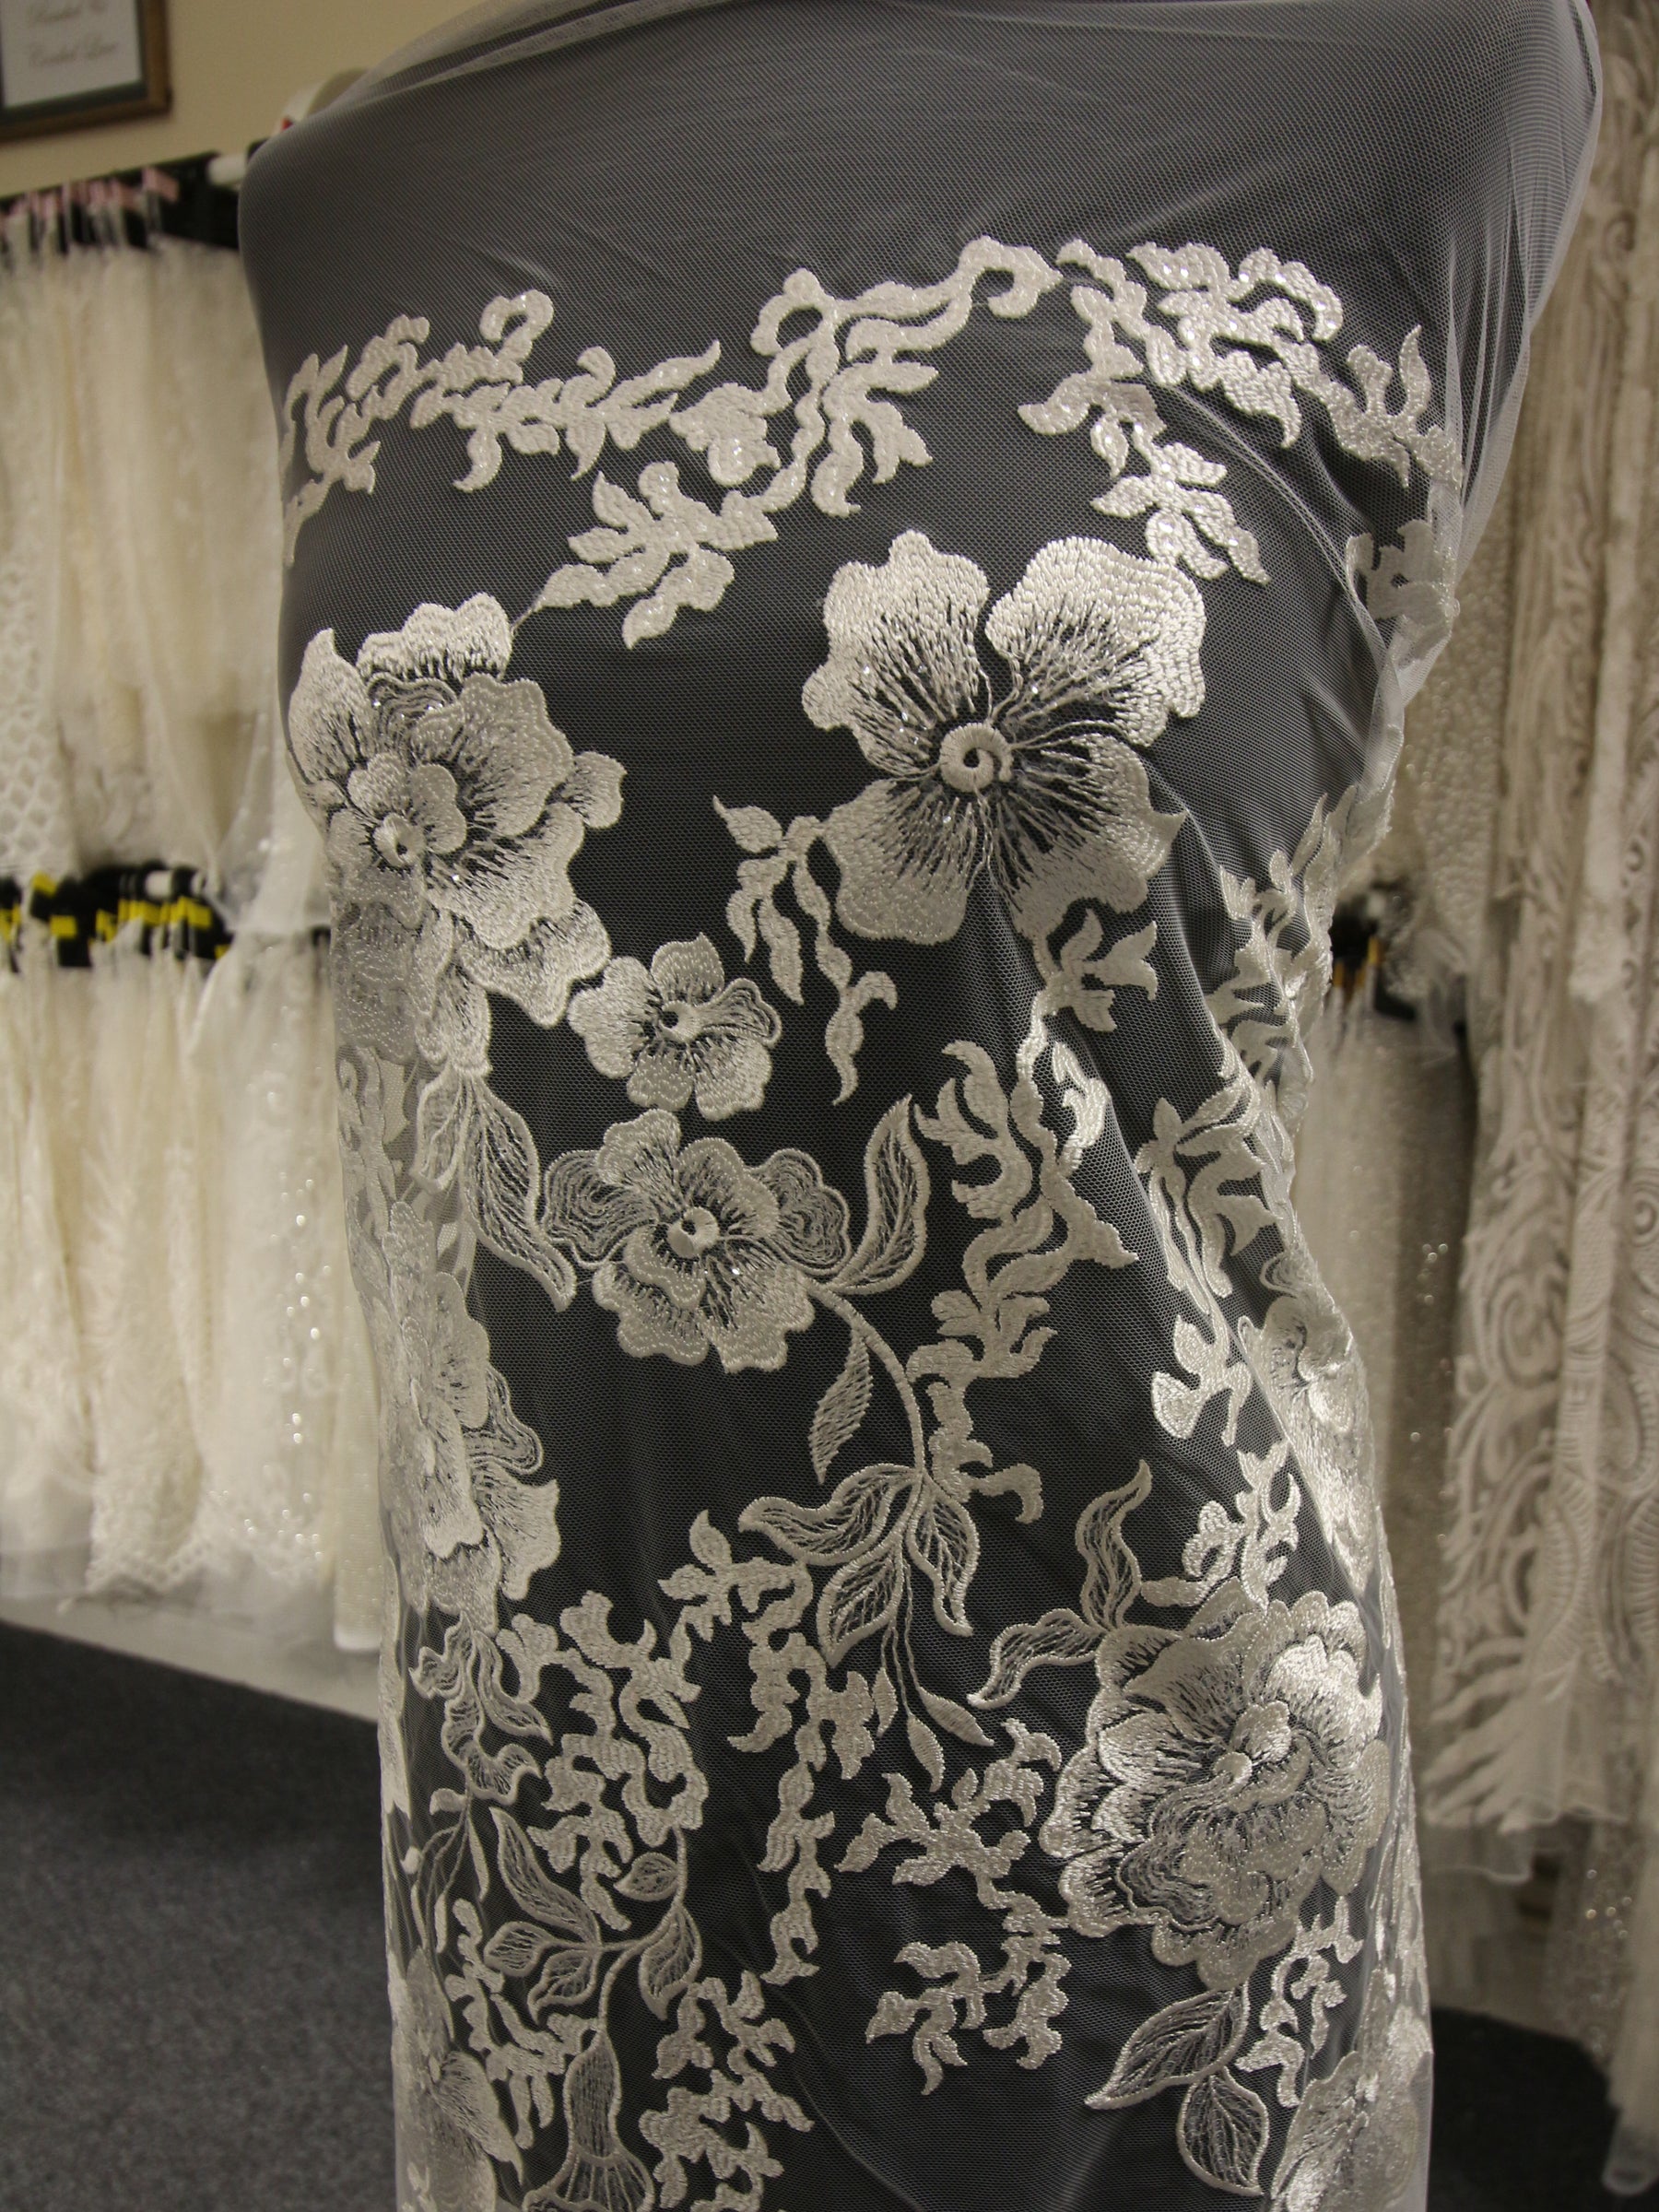 Ivory Embroidered Lace - Axcelle